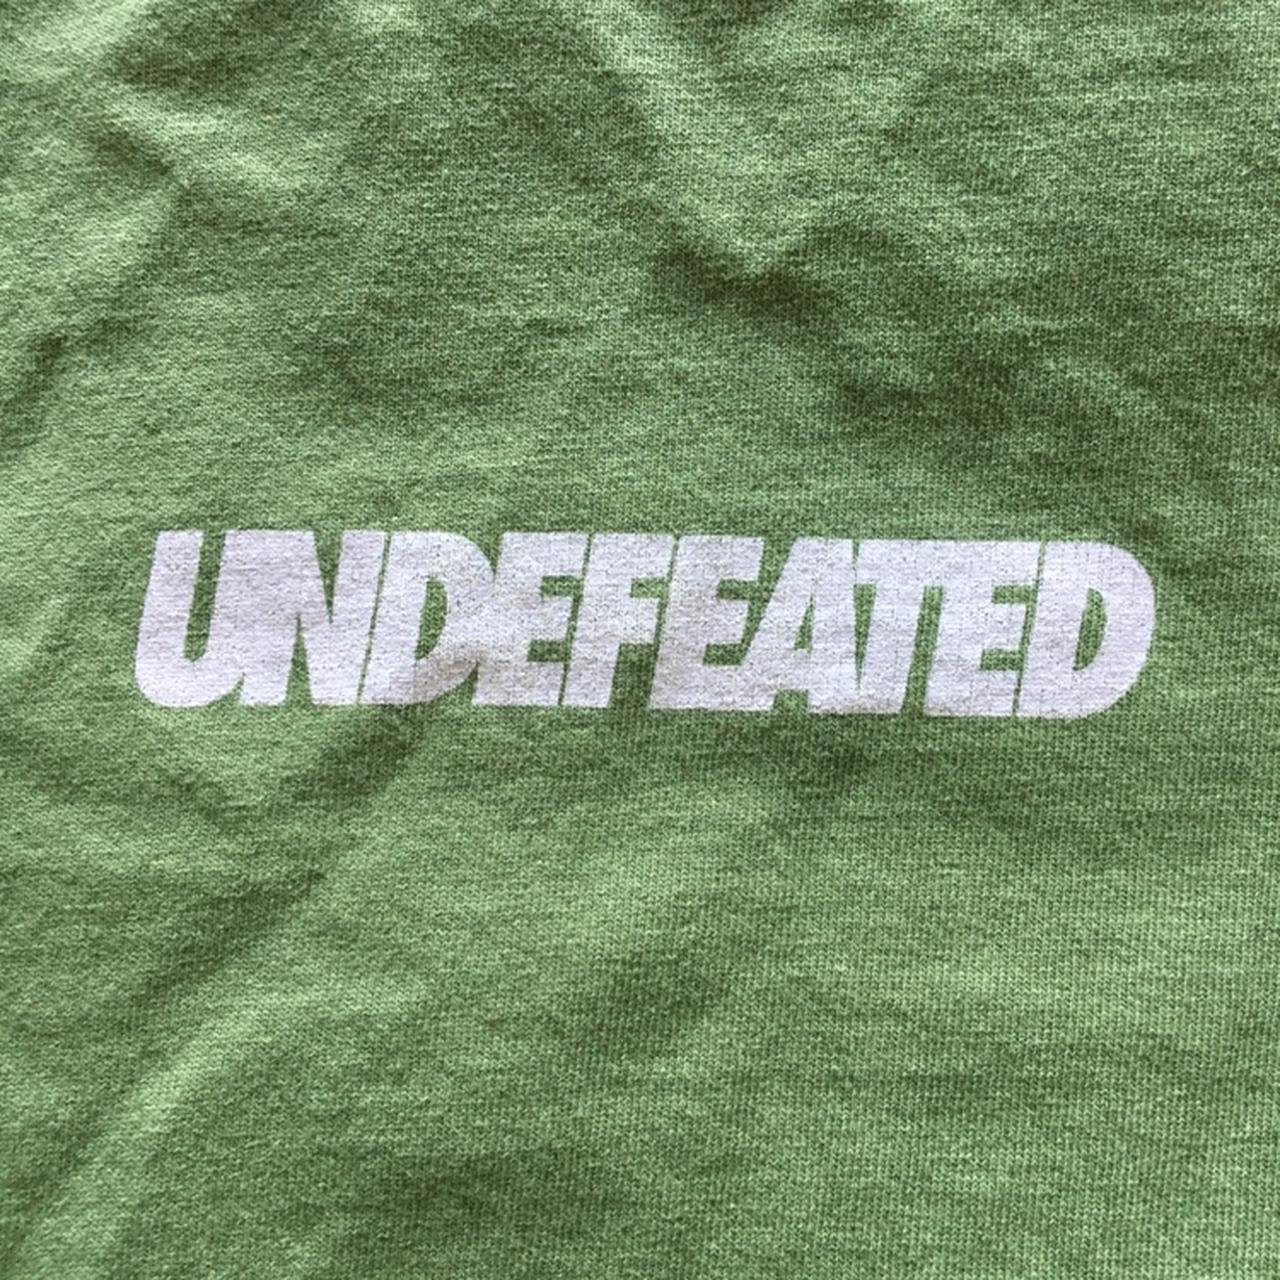 Undefeated Men's T-shirt (2)